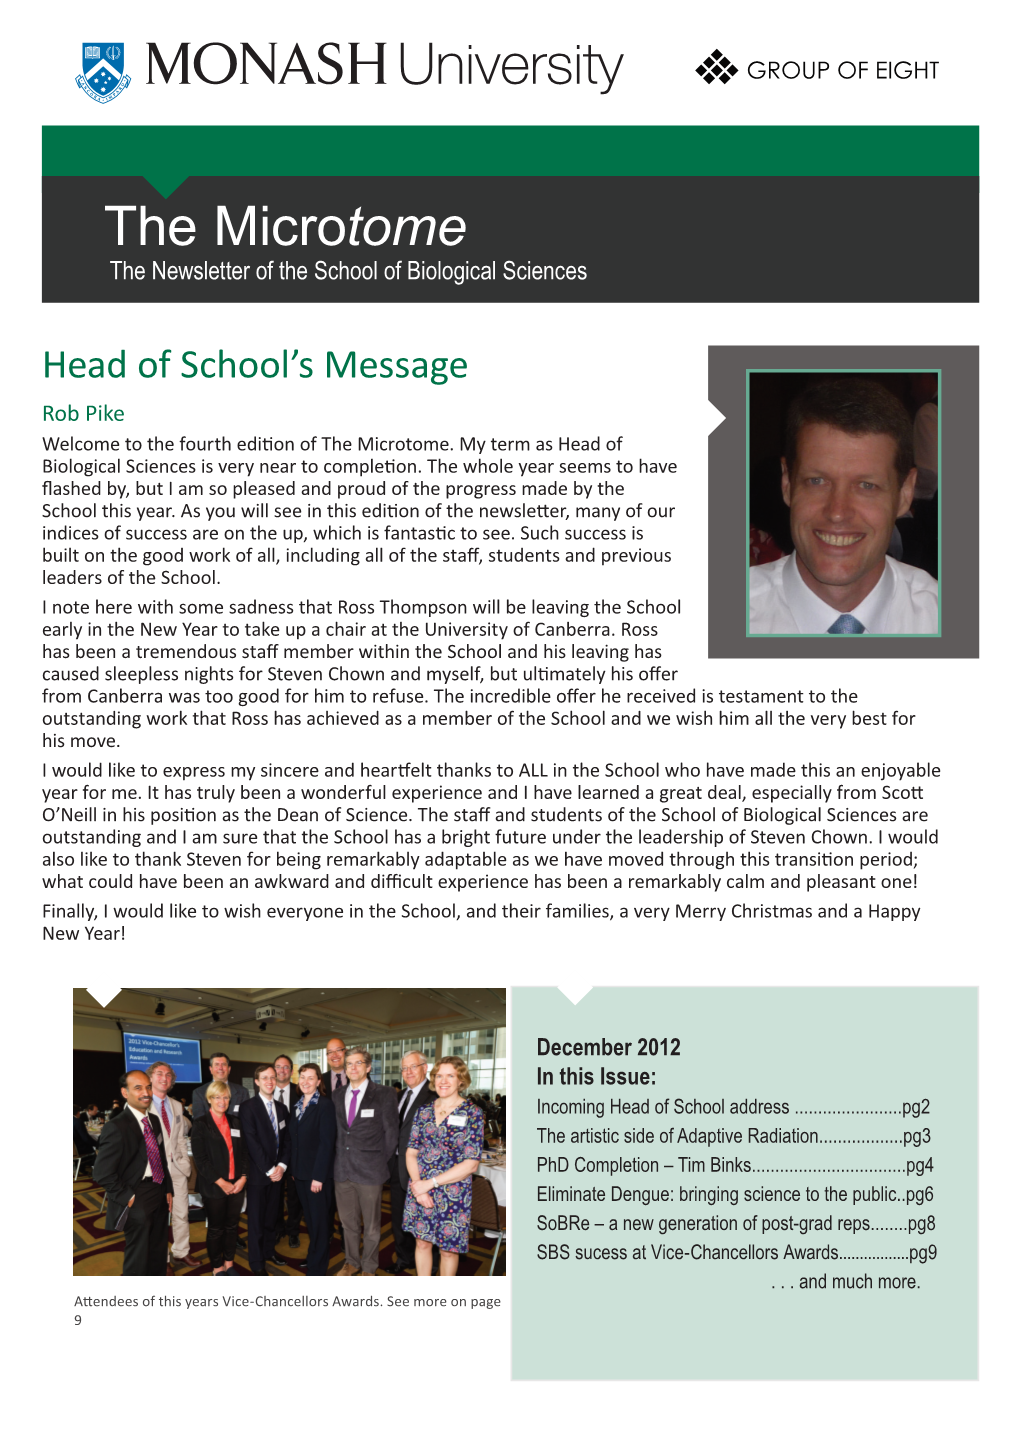 The Microtome the Newsletter of the School of Biological Sciences